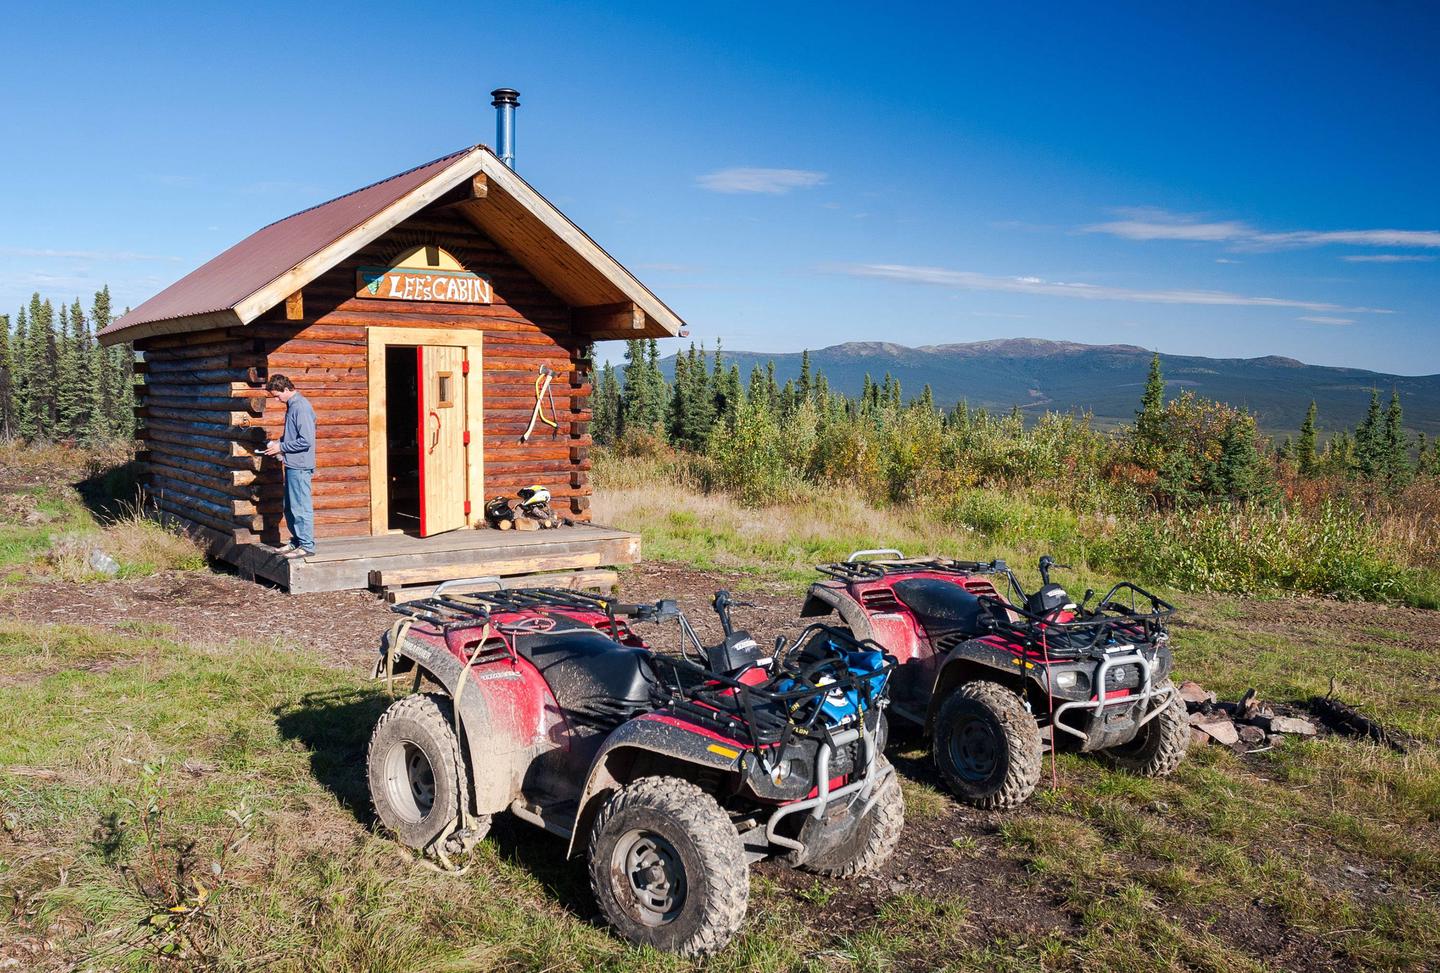 Two all-terrain vehicles parked in front of a log cabinLee's Cabin, unlike many of the White Mountains cabins, is readily accessible in summer.